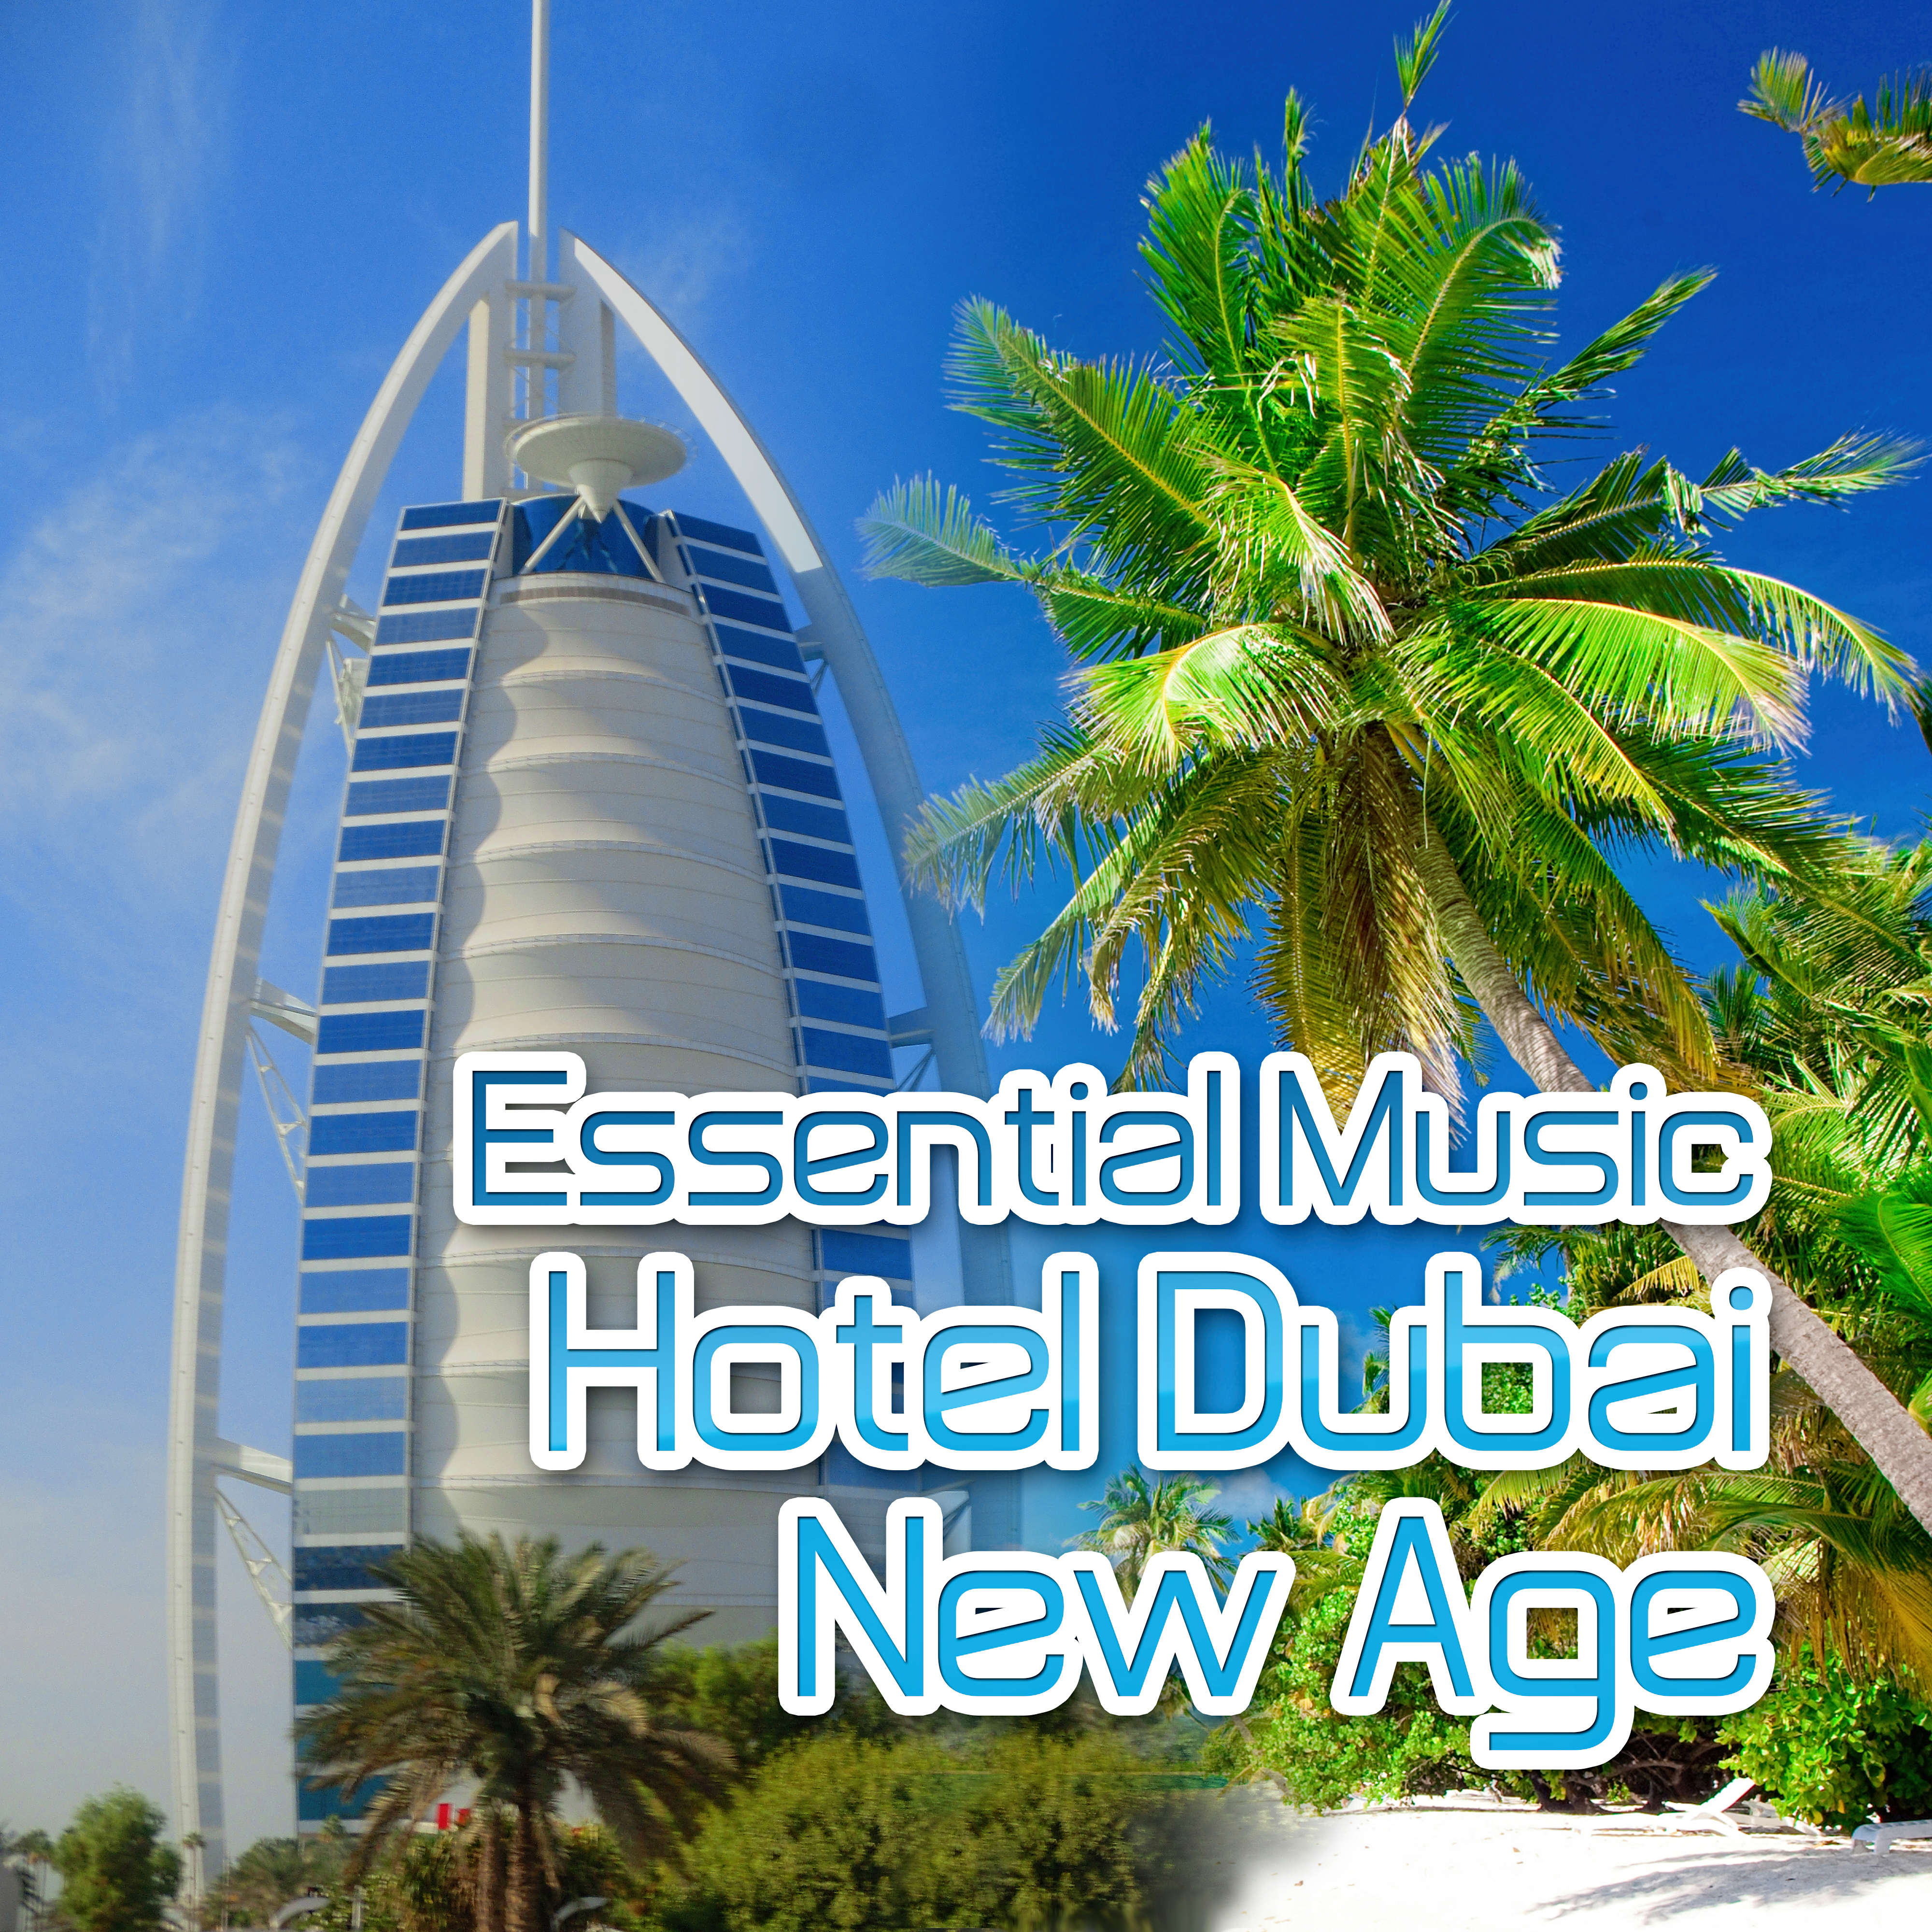 Essential Music Hotel Dubai - New Age – Spa Music, Wellness, Hydrotherapy, Massage Music, Nature Sounds, Easy Going, Total Relax